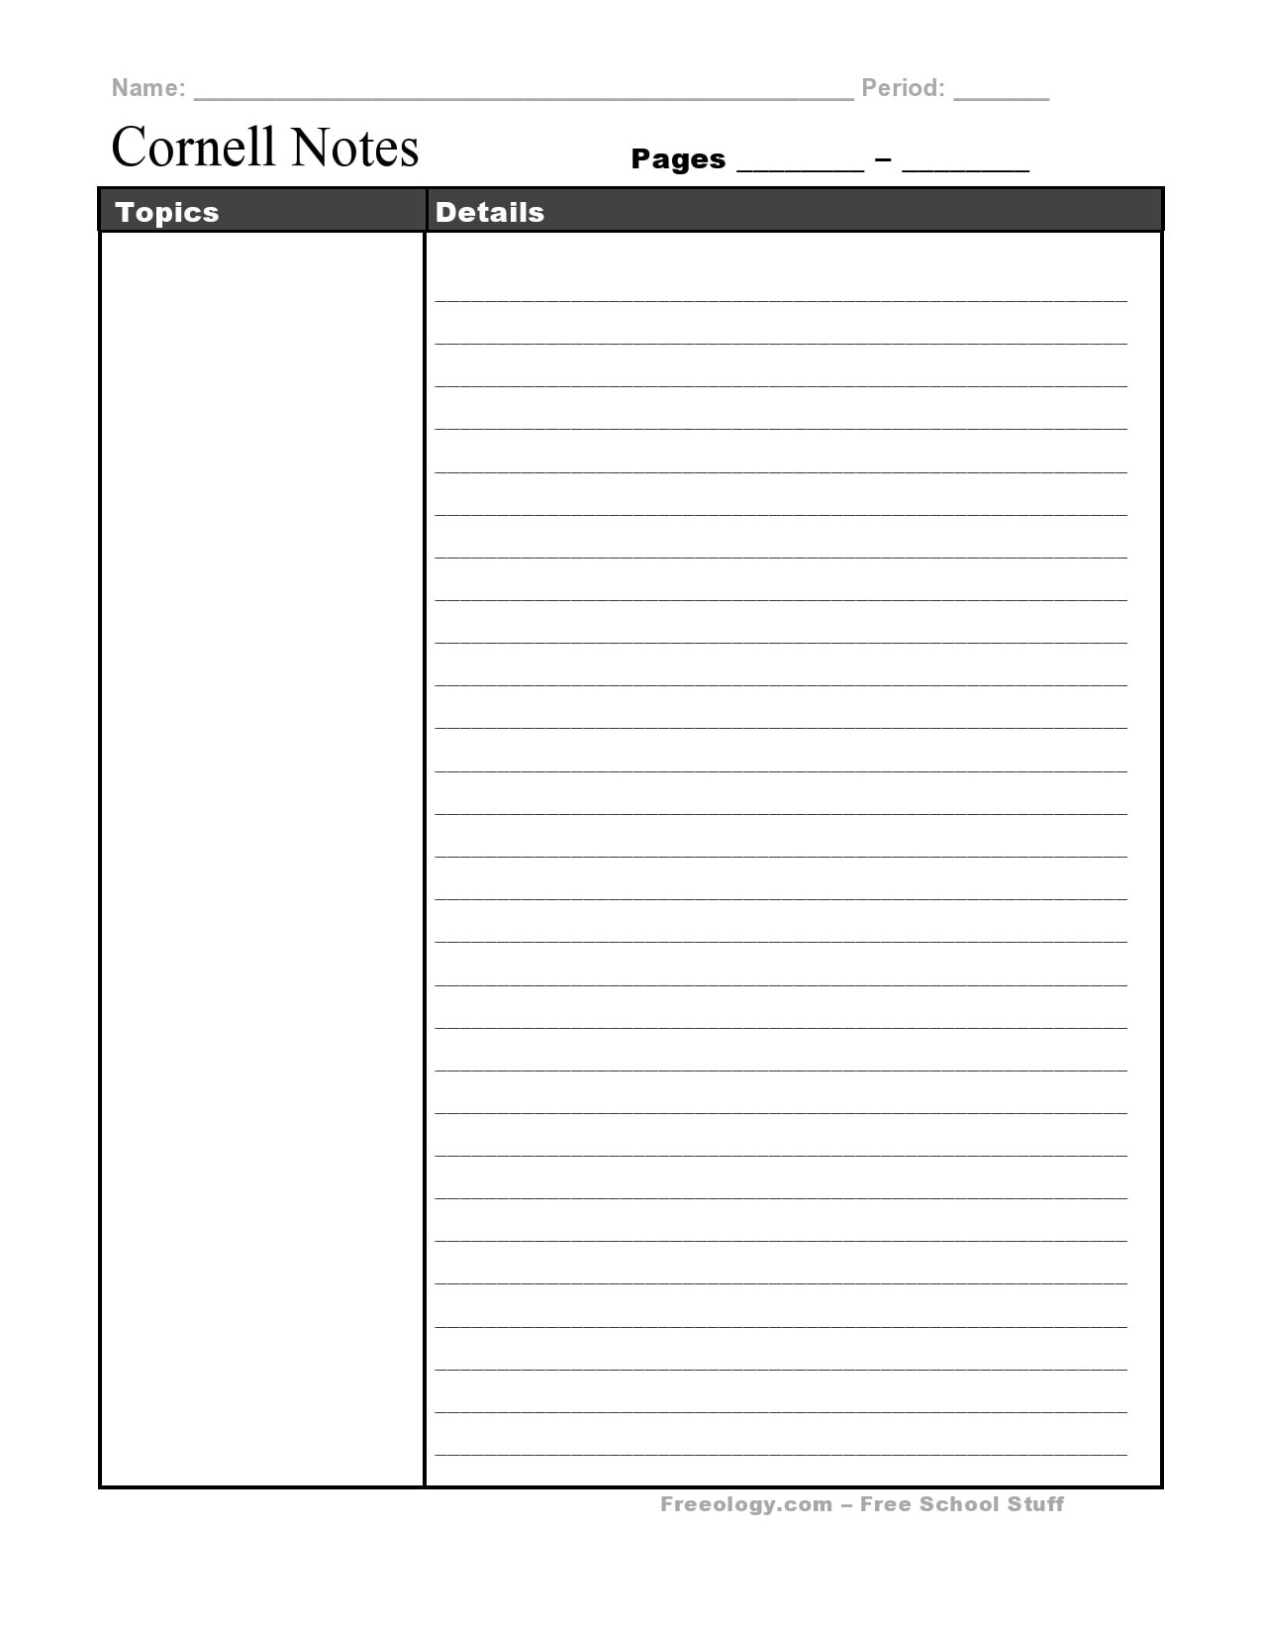 Free Printable Note Taking Templates – 12 Best Cornell Notes Images On With Best Note Taking Template